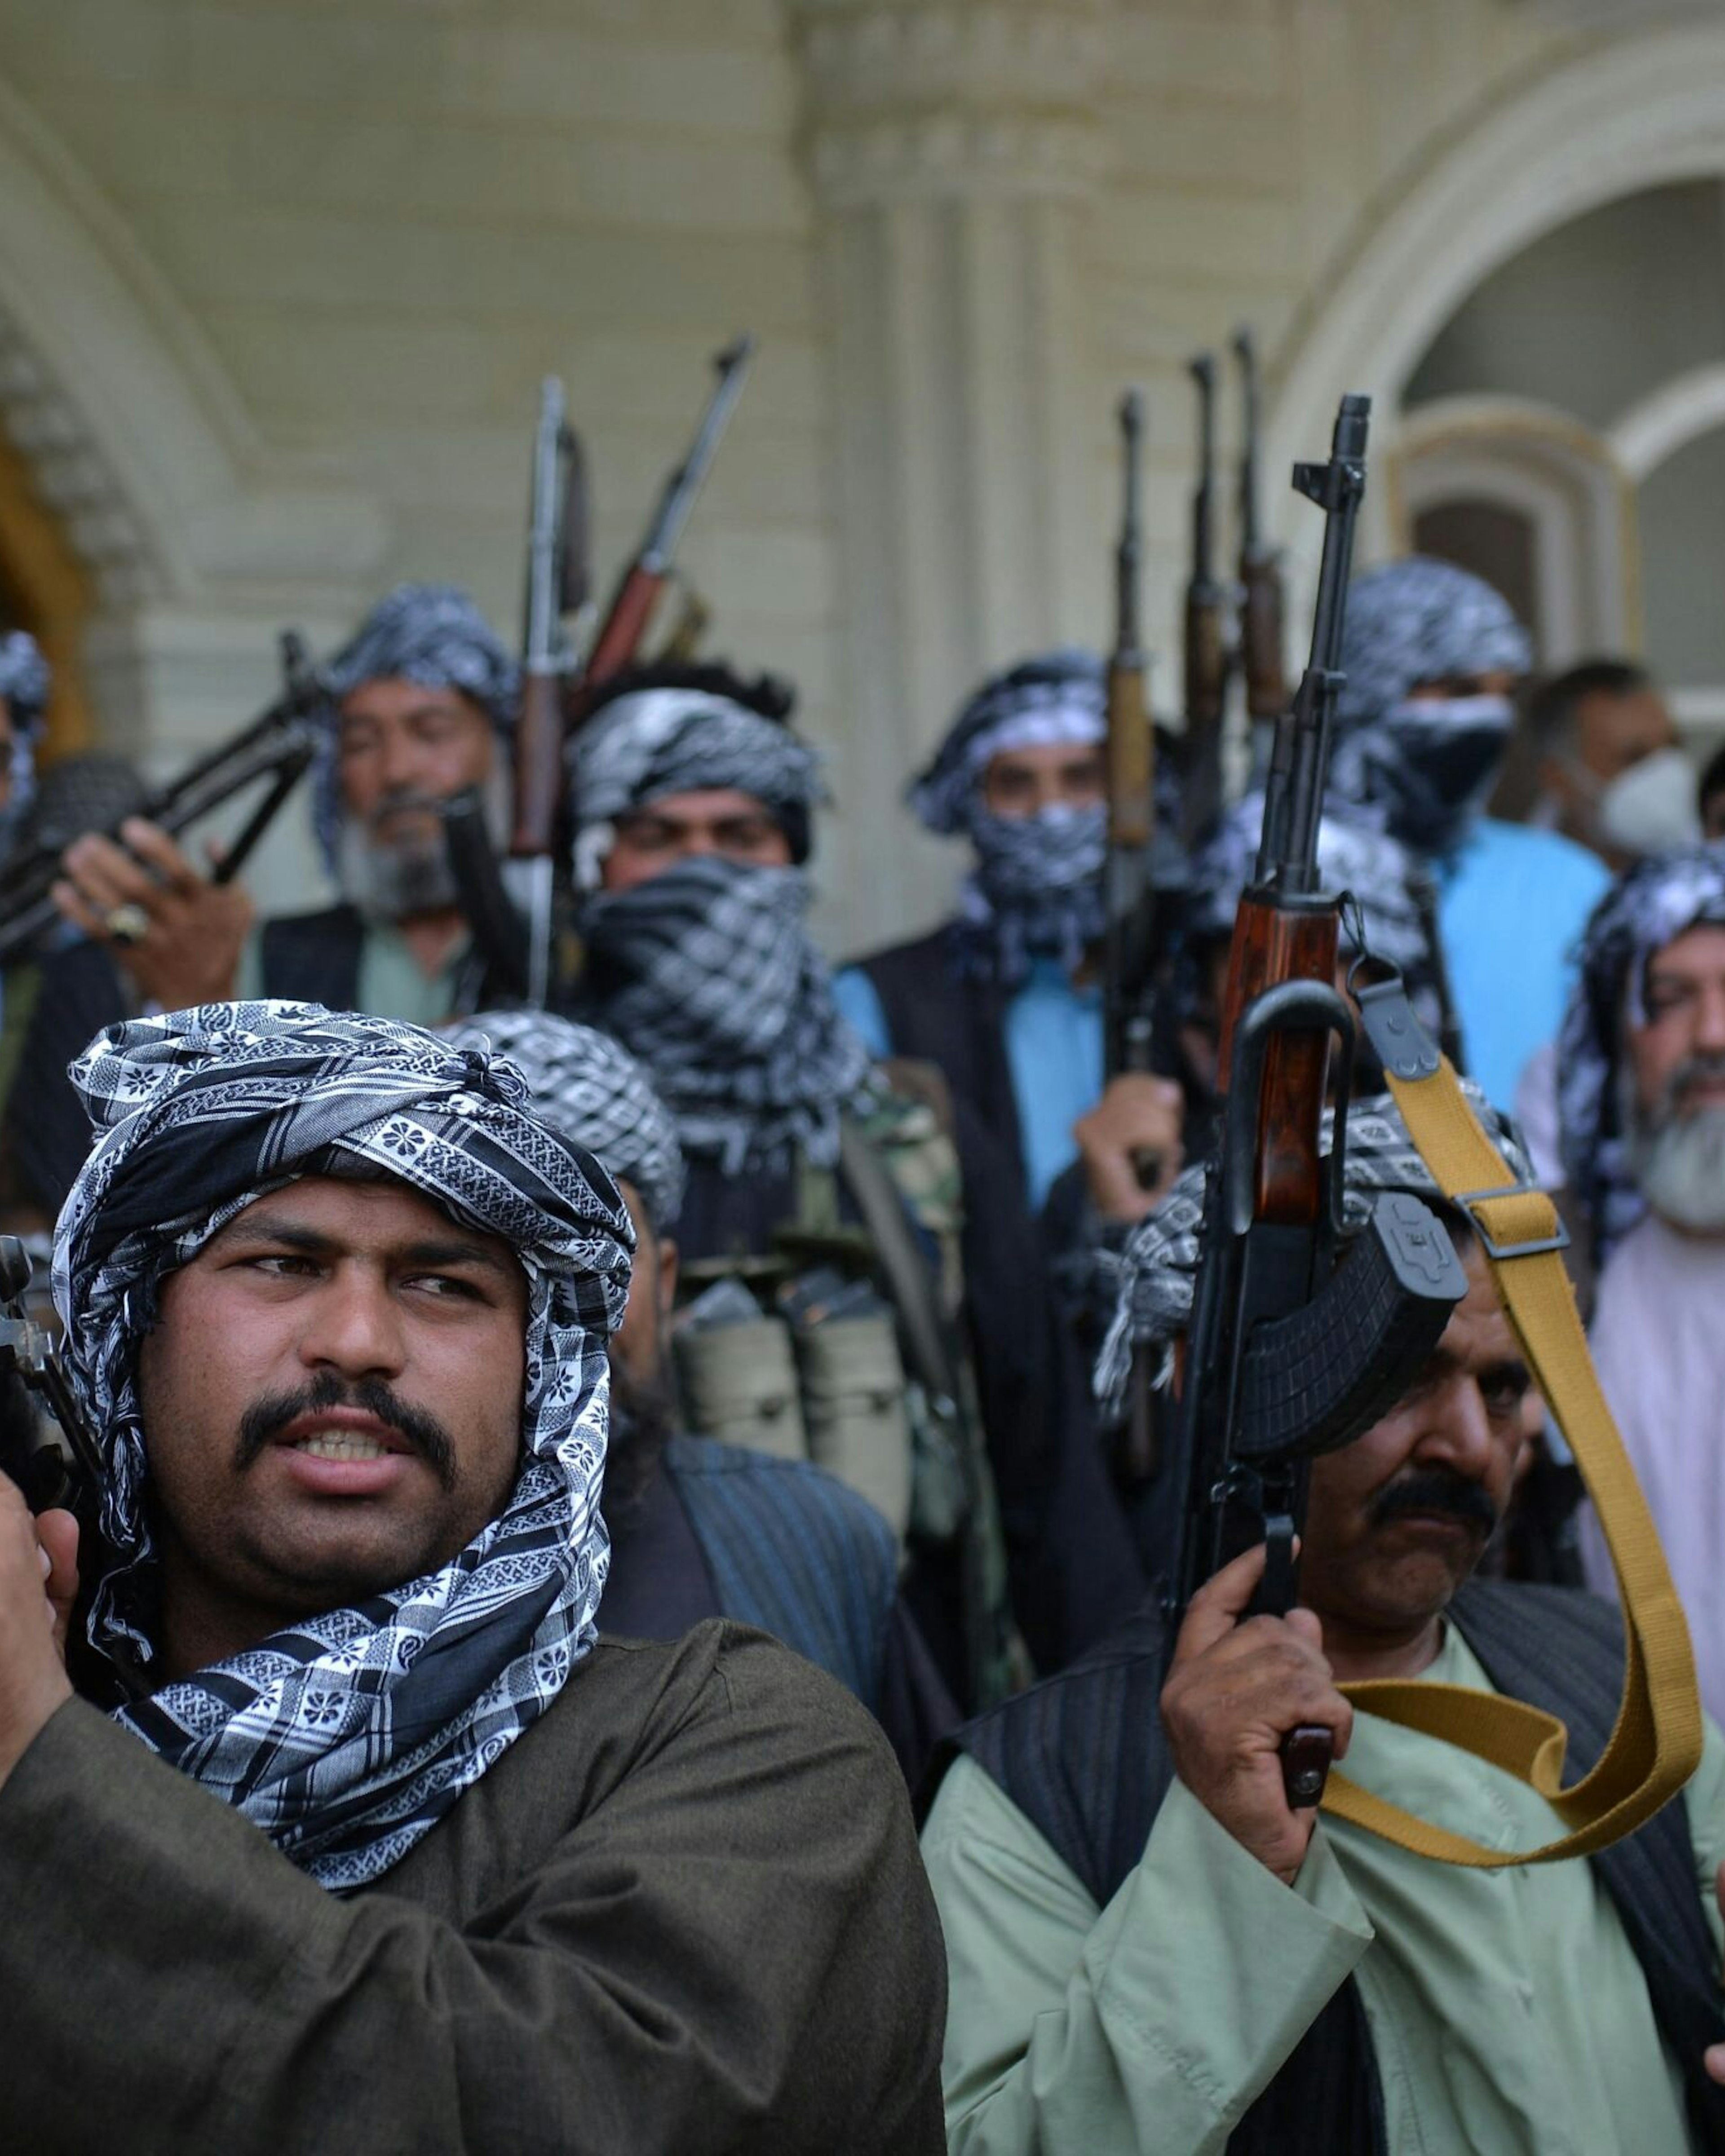 TOPSHOT - Afghan militia gather with their weapons to support Afghanistan security forces against the Taliban, in Afghan warlord and former Mujahideen leader Ismail Khan's house in Herat on July 9, 2021. (Photo by Hoshang HASHIMI / AFP) (Photo by HOSHANG HASHIMI/AFP via Getty Images)